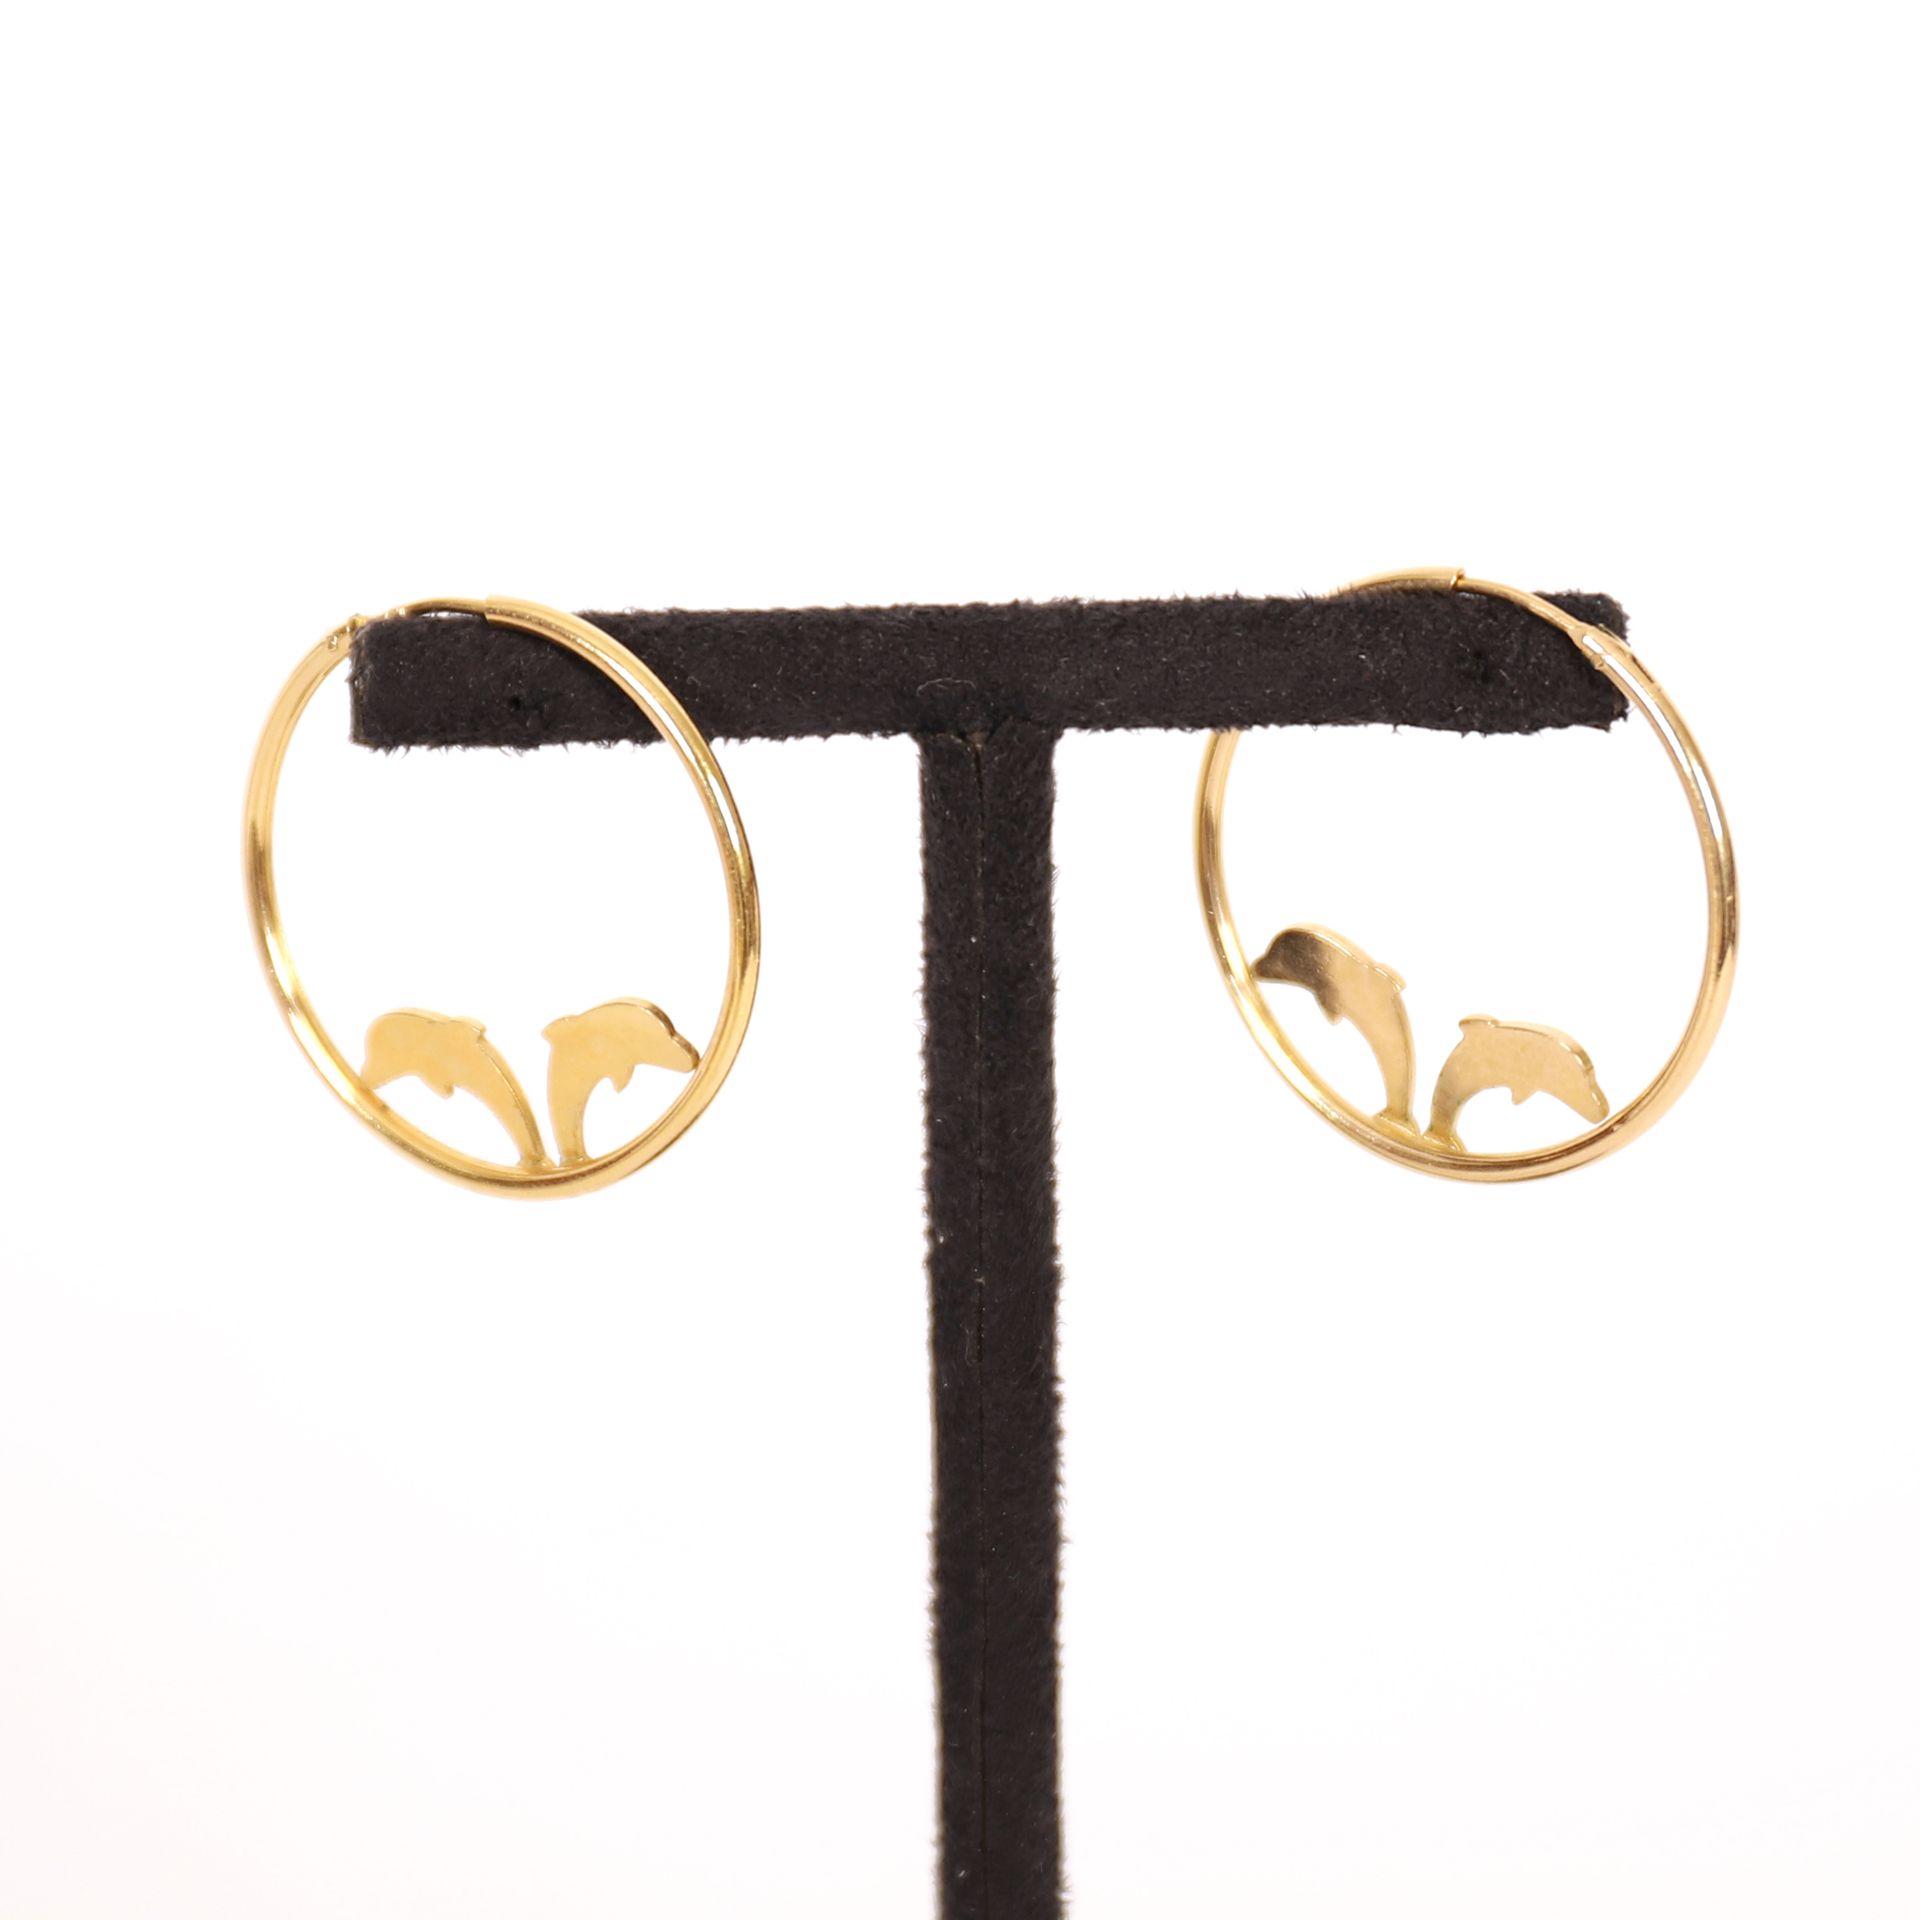 Null PAIR OF GOLD LEAPING DOLPHIN EARRINGS

Pb : 4 grs